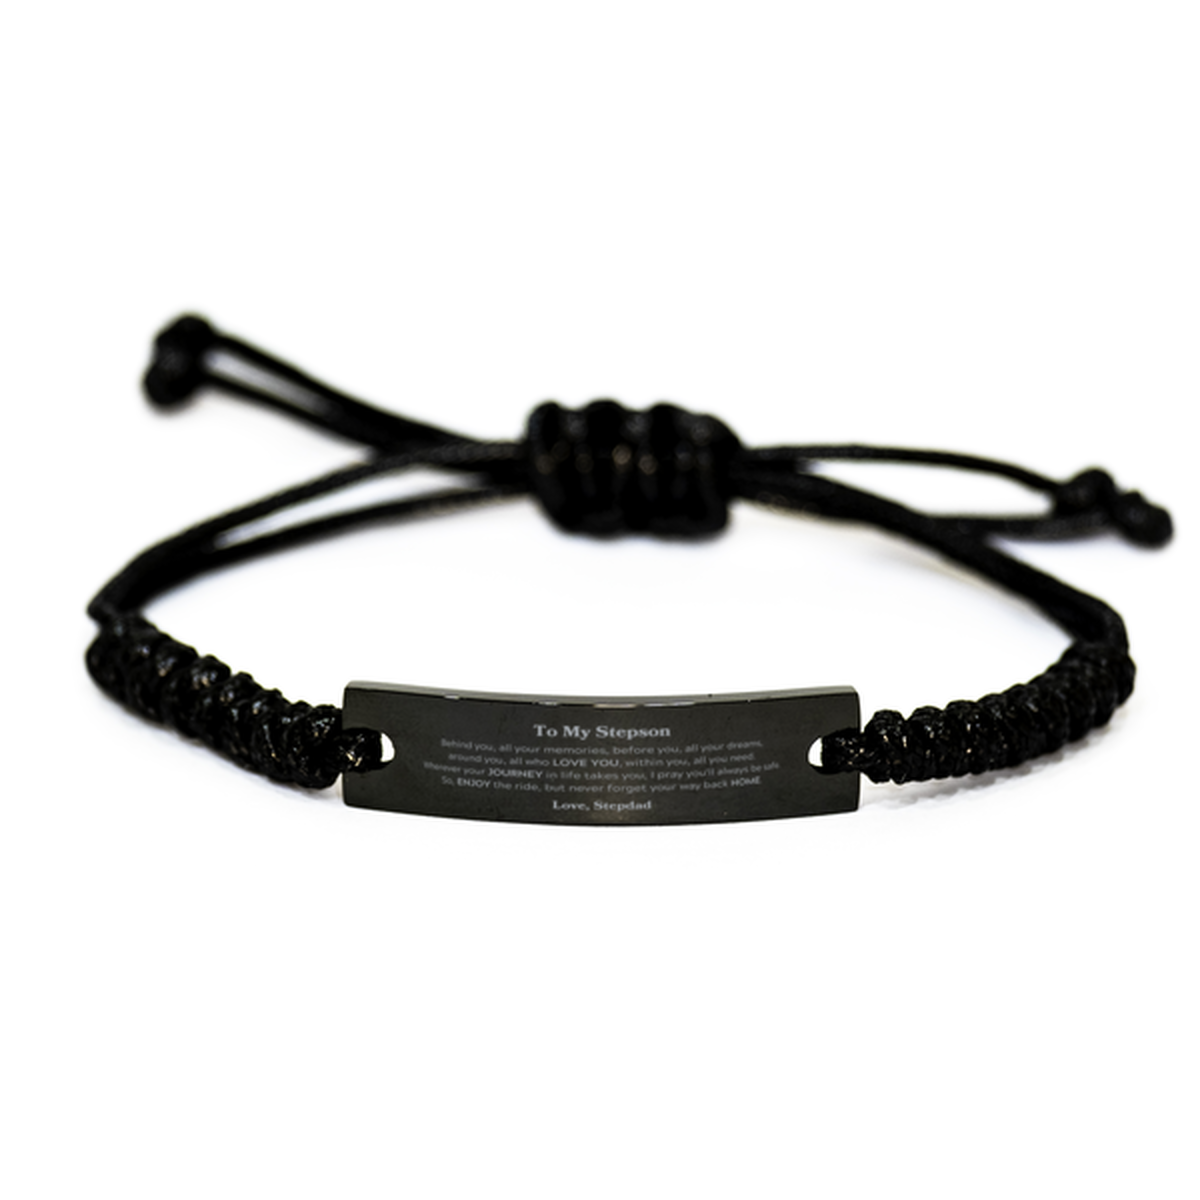 To My Stepson Graduation Gifts from Stepdad, Stepson Black Rope Bracelet Christmas Birthday Gifts for Stepson Behind you, all your memories, before you, all your dreams. Love, Stepdad